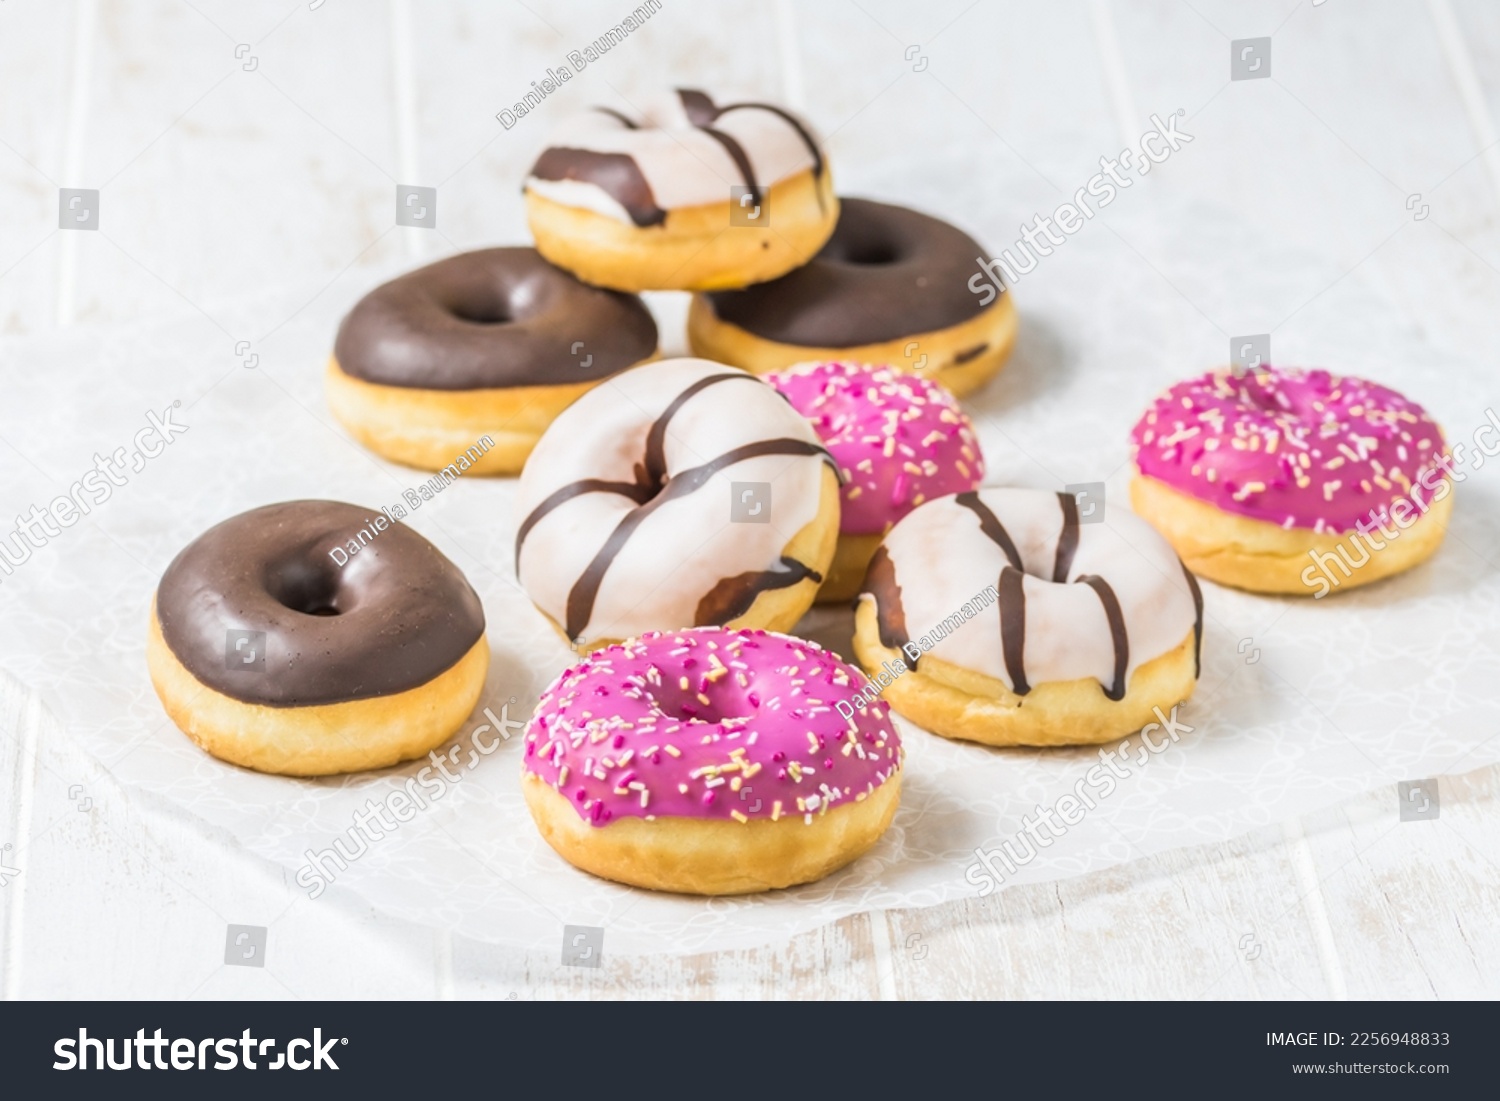 Colorful Donuts, Berliner, Krapfen with sugar icing and chocolate on white wooden background, vertical with copy space #2256948833